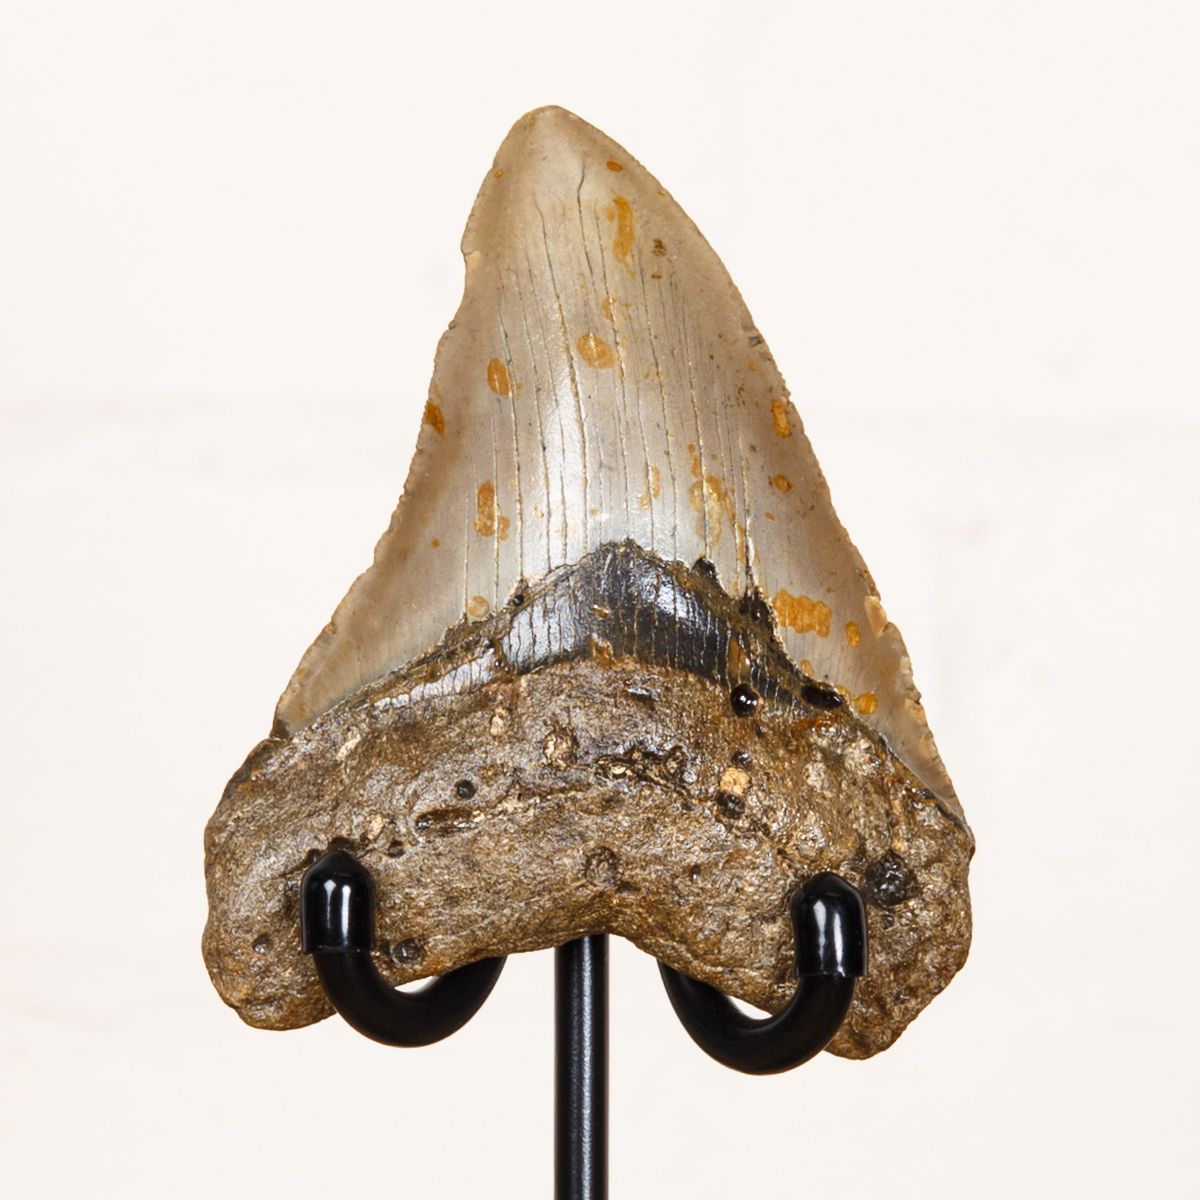 Huge 4.1 Inch Megalodon Shark Tooth Fossil on Stand (Carcharodon megalodon)